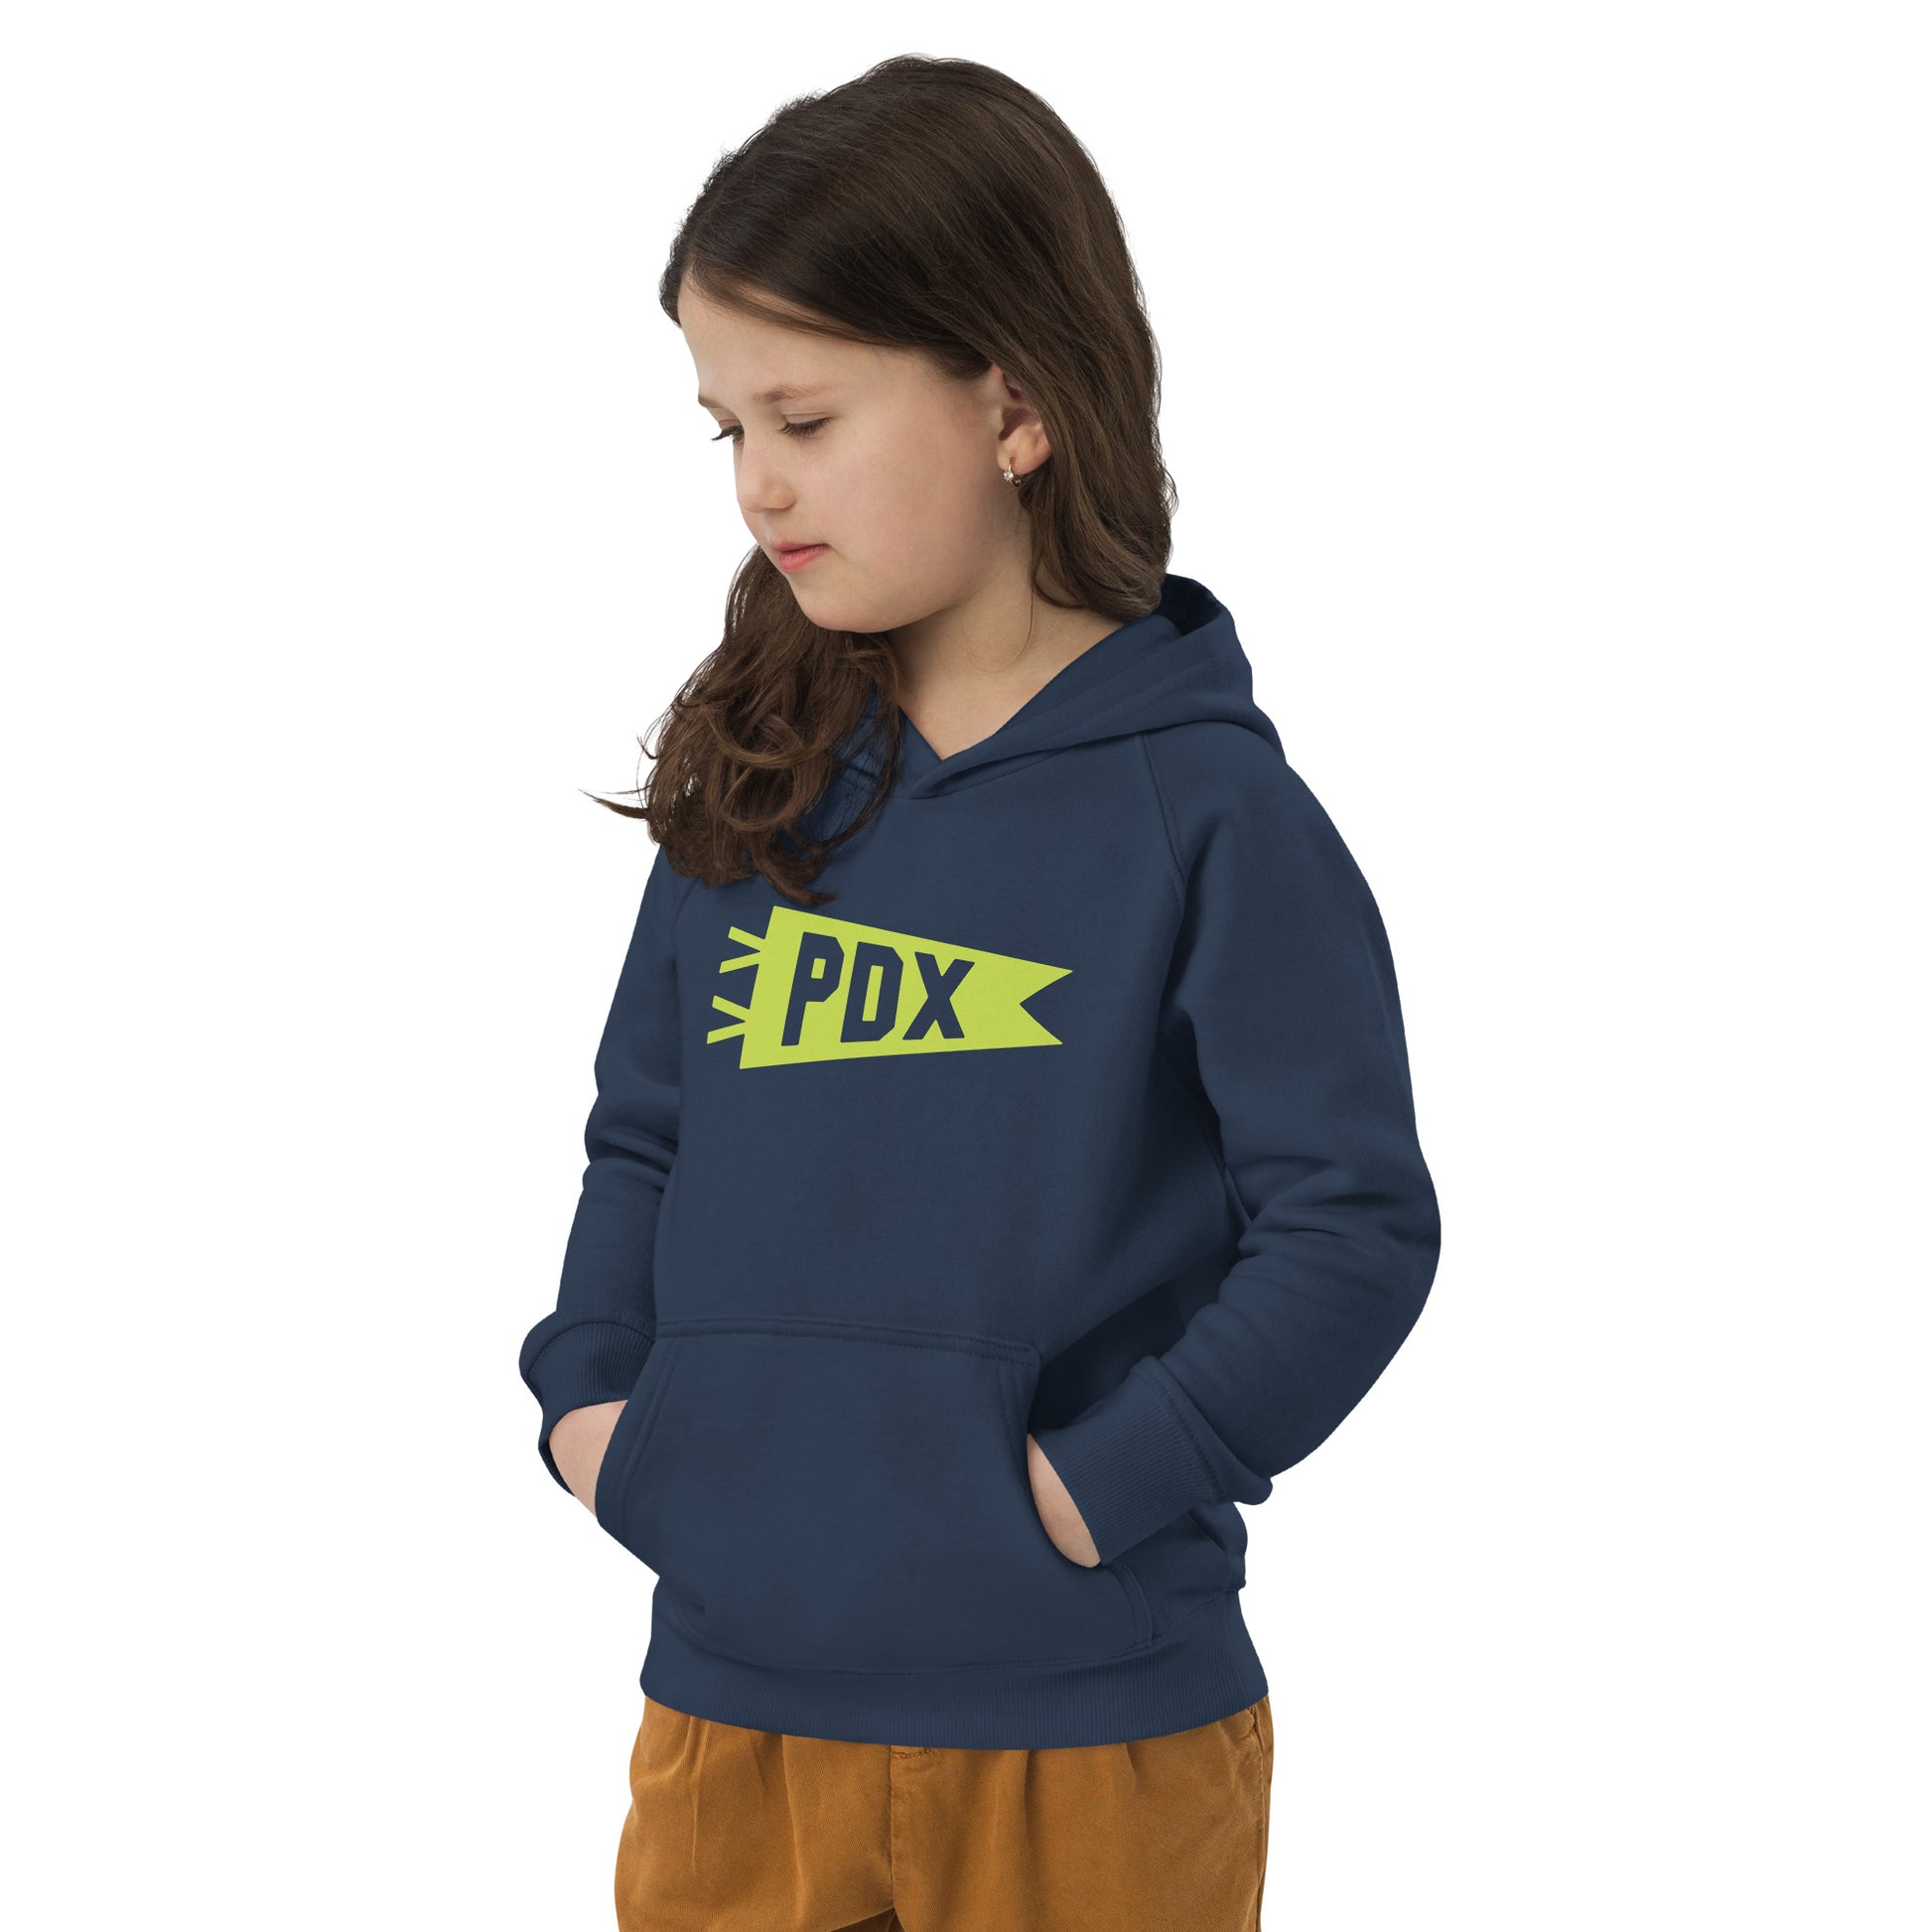 Kid's Sustainable Hoodie - Green Graphic • PDX Portland • YHM Designs - Image 05